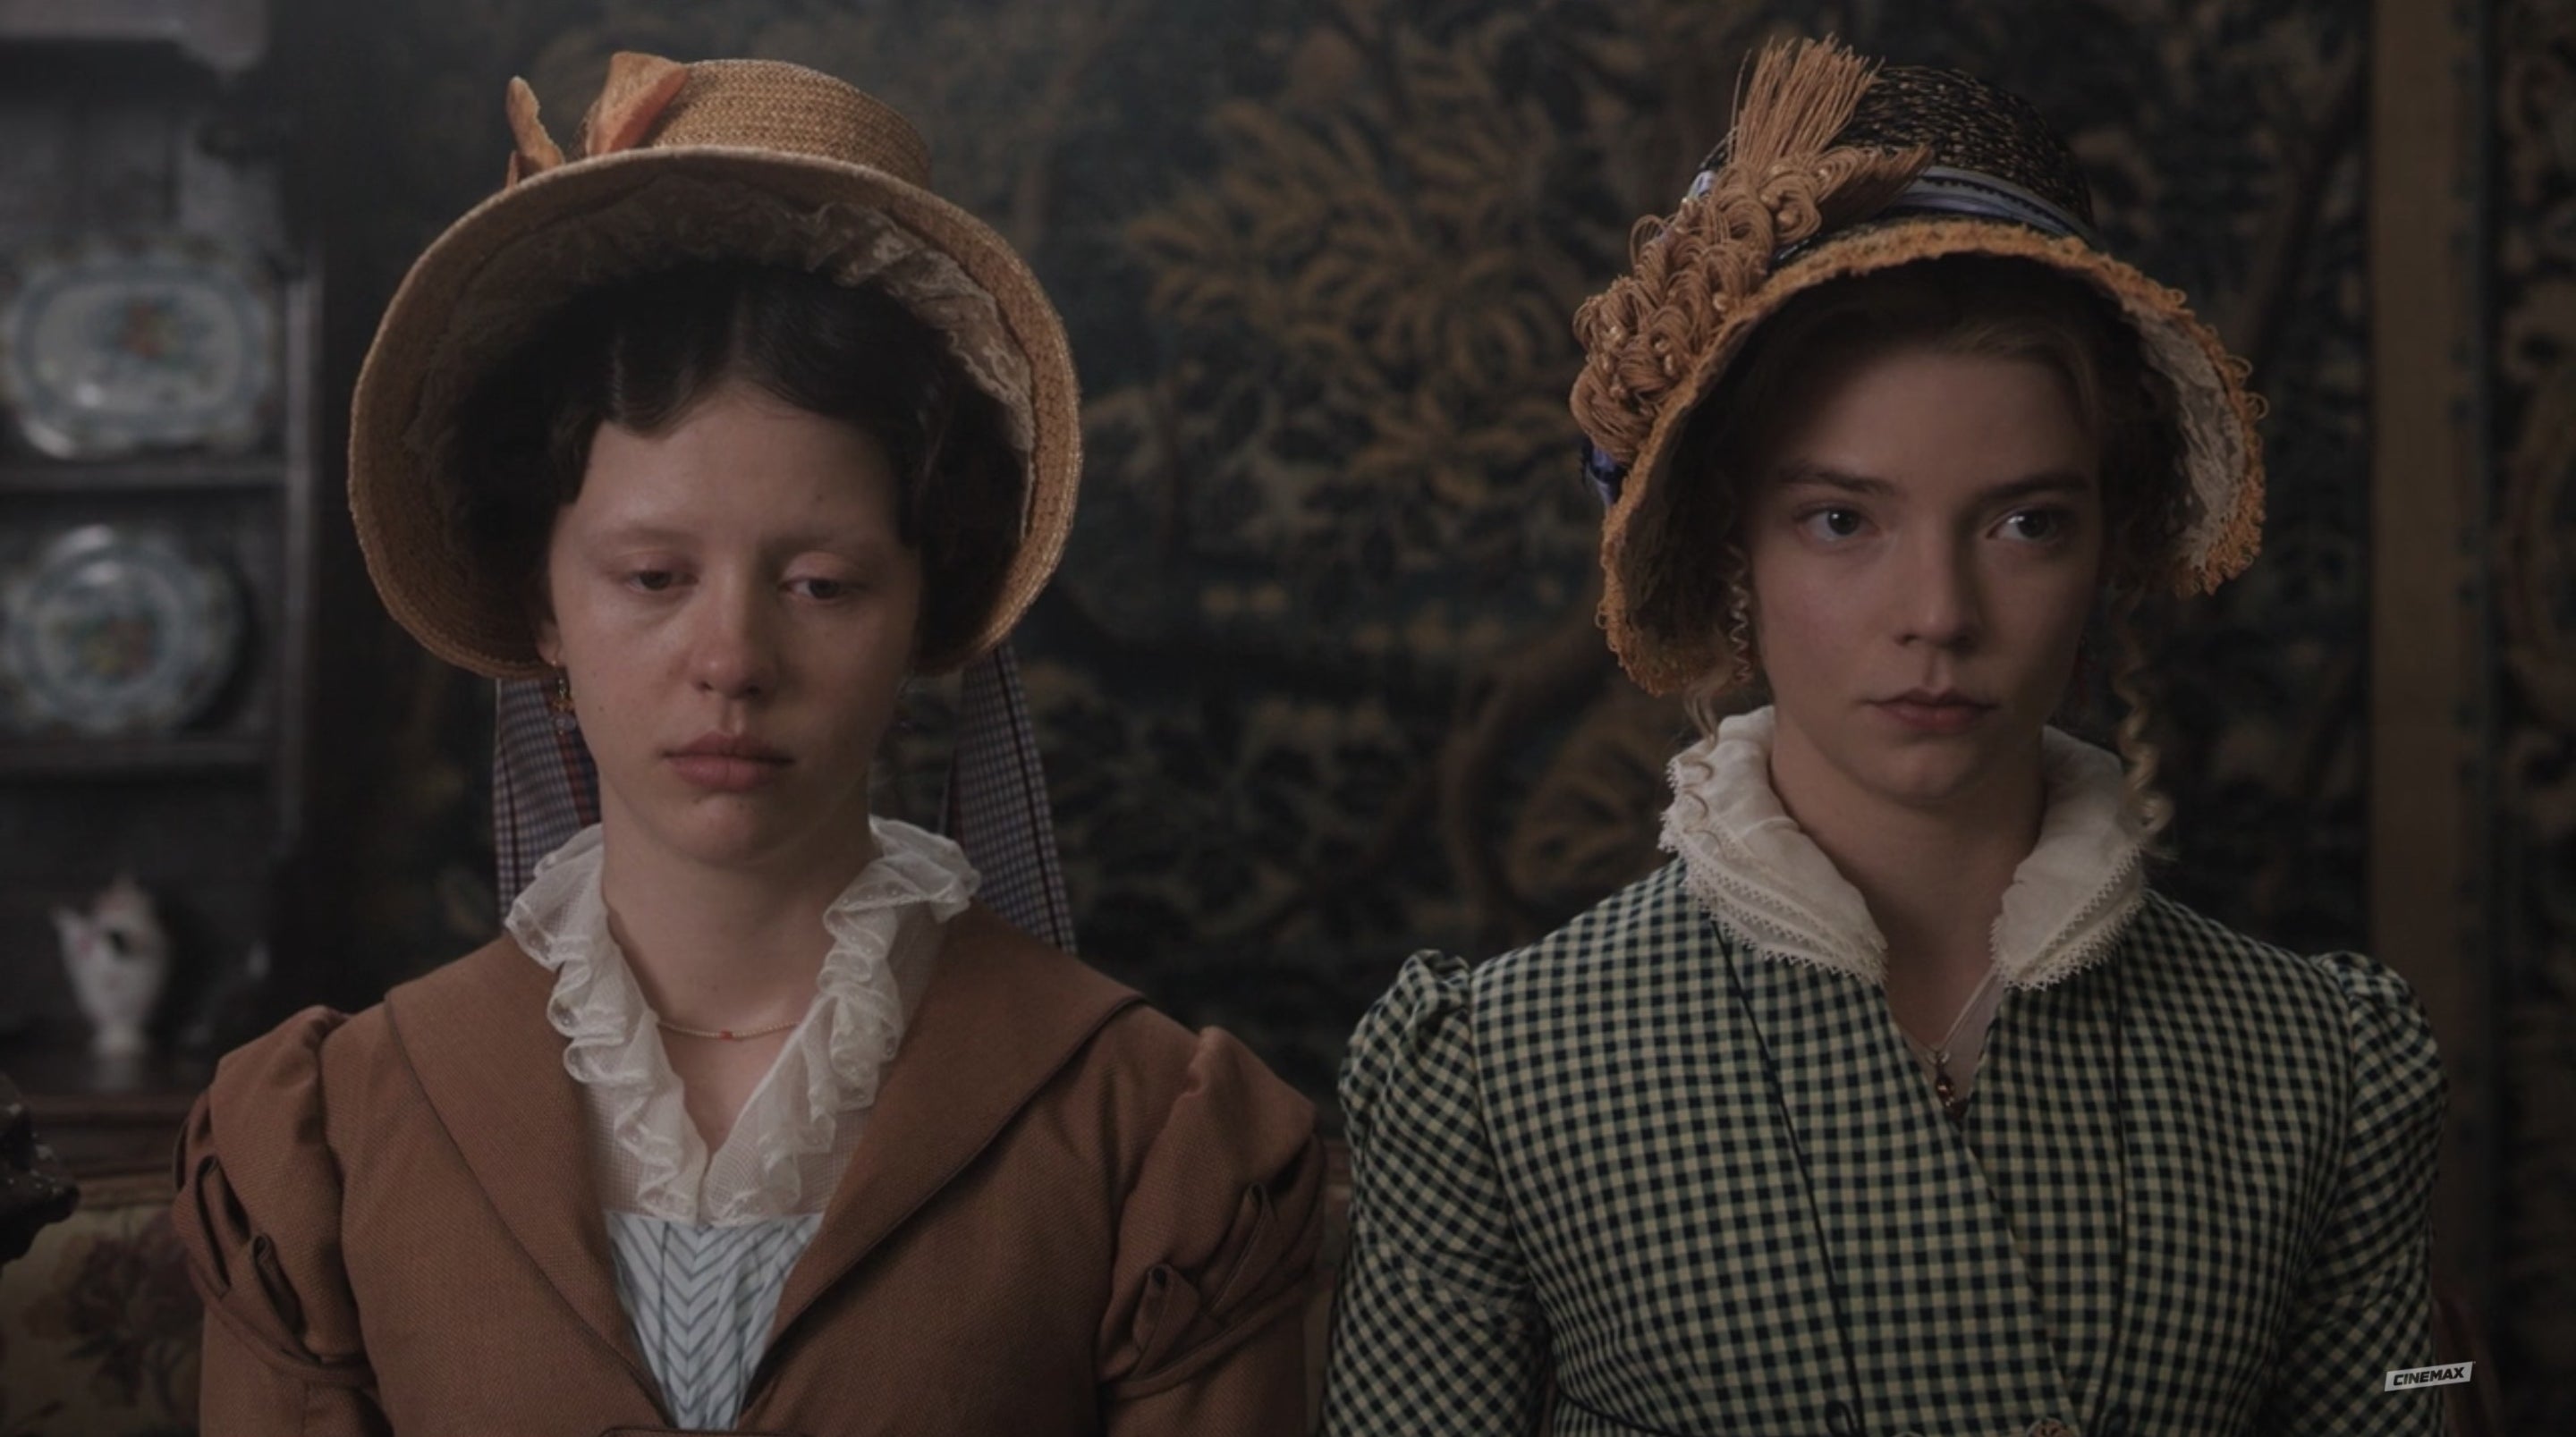 Emma and Harriet stare blankly and bored-looking, each wearing a fancy hat